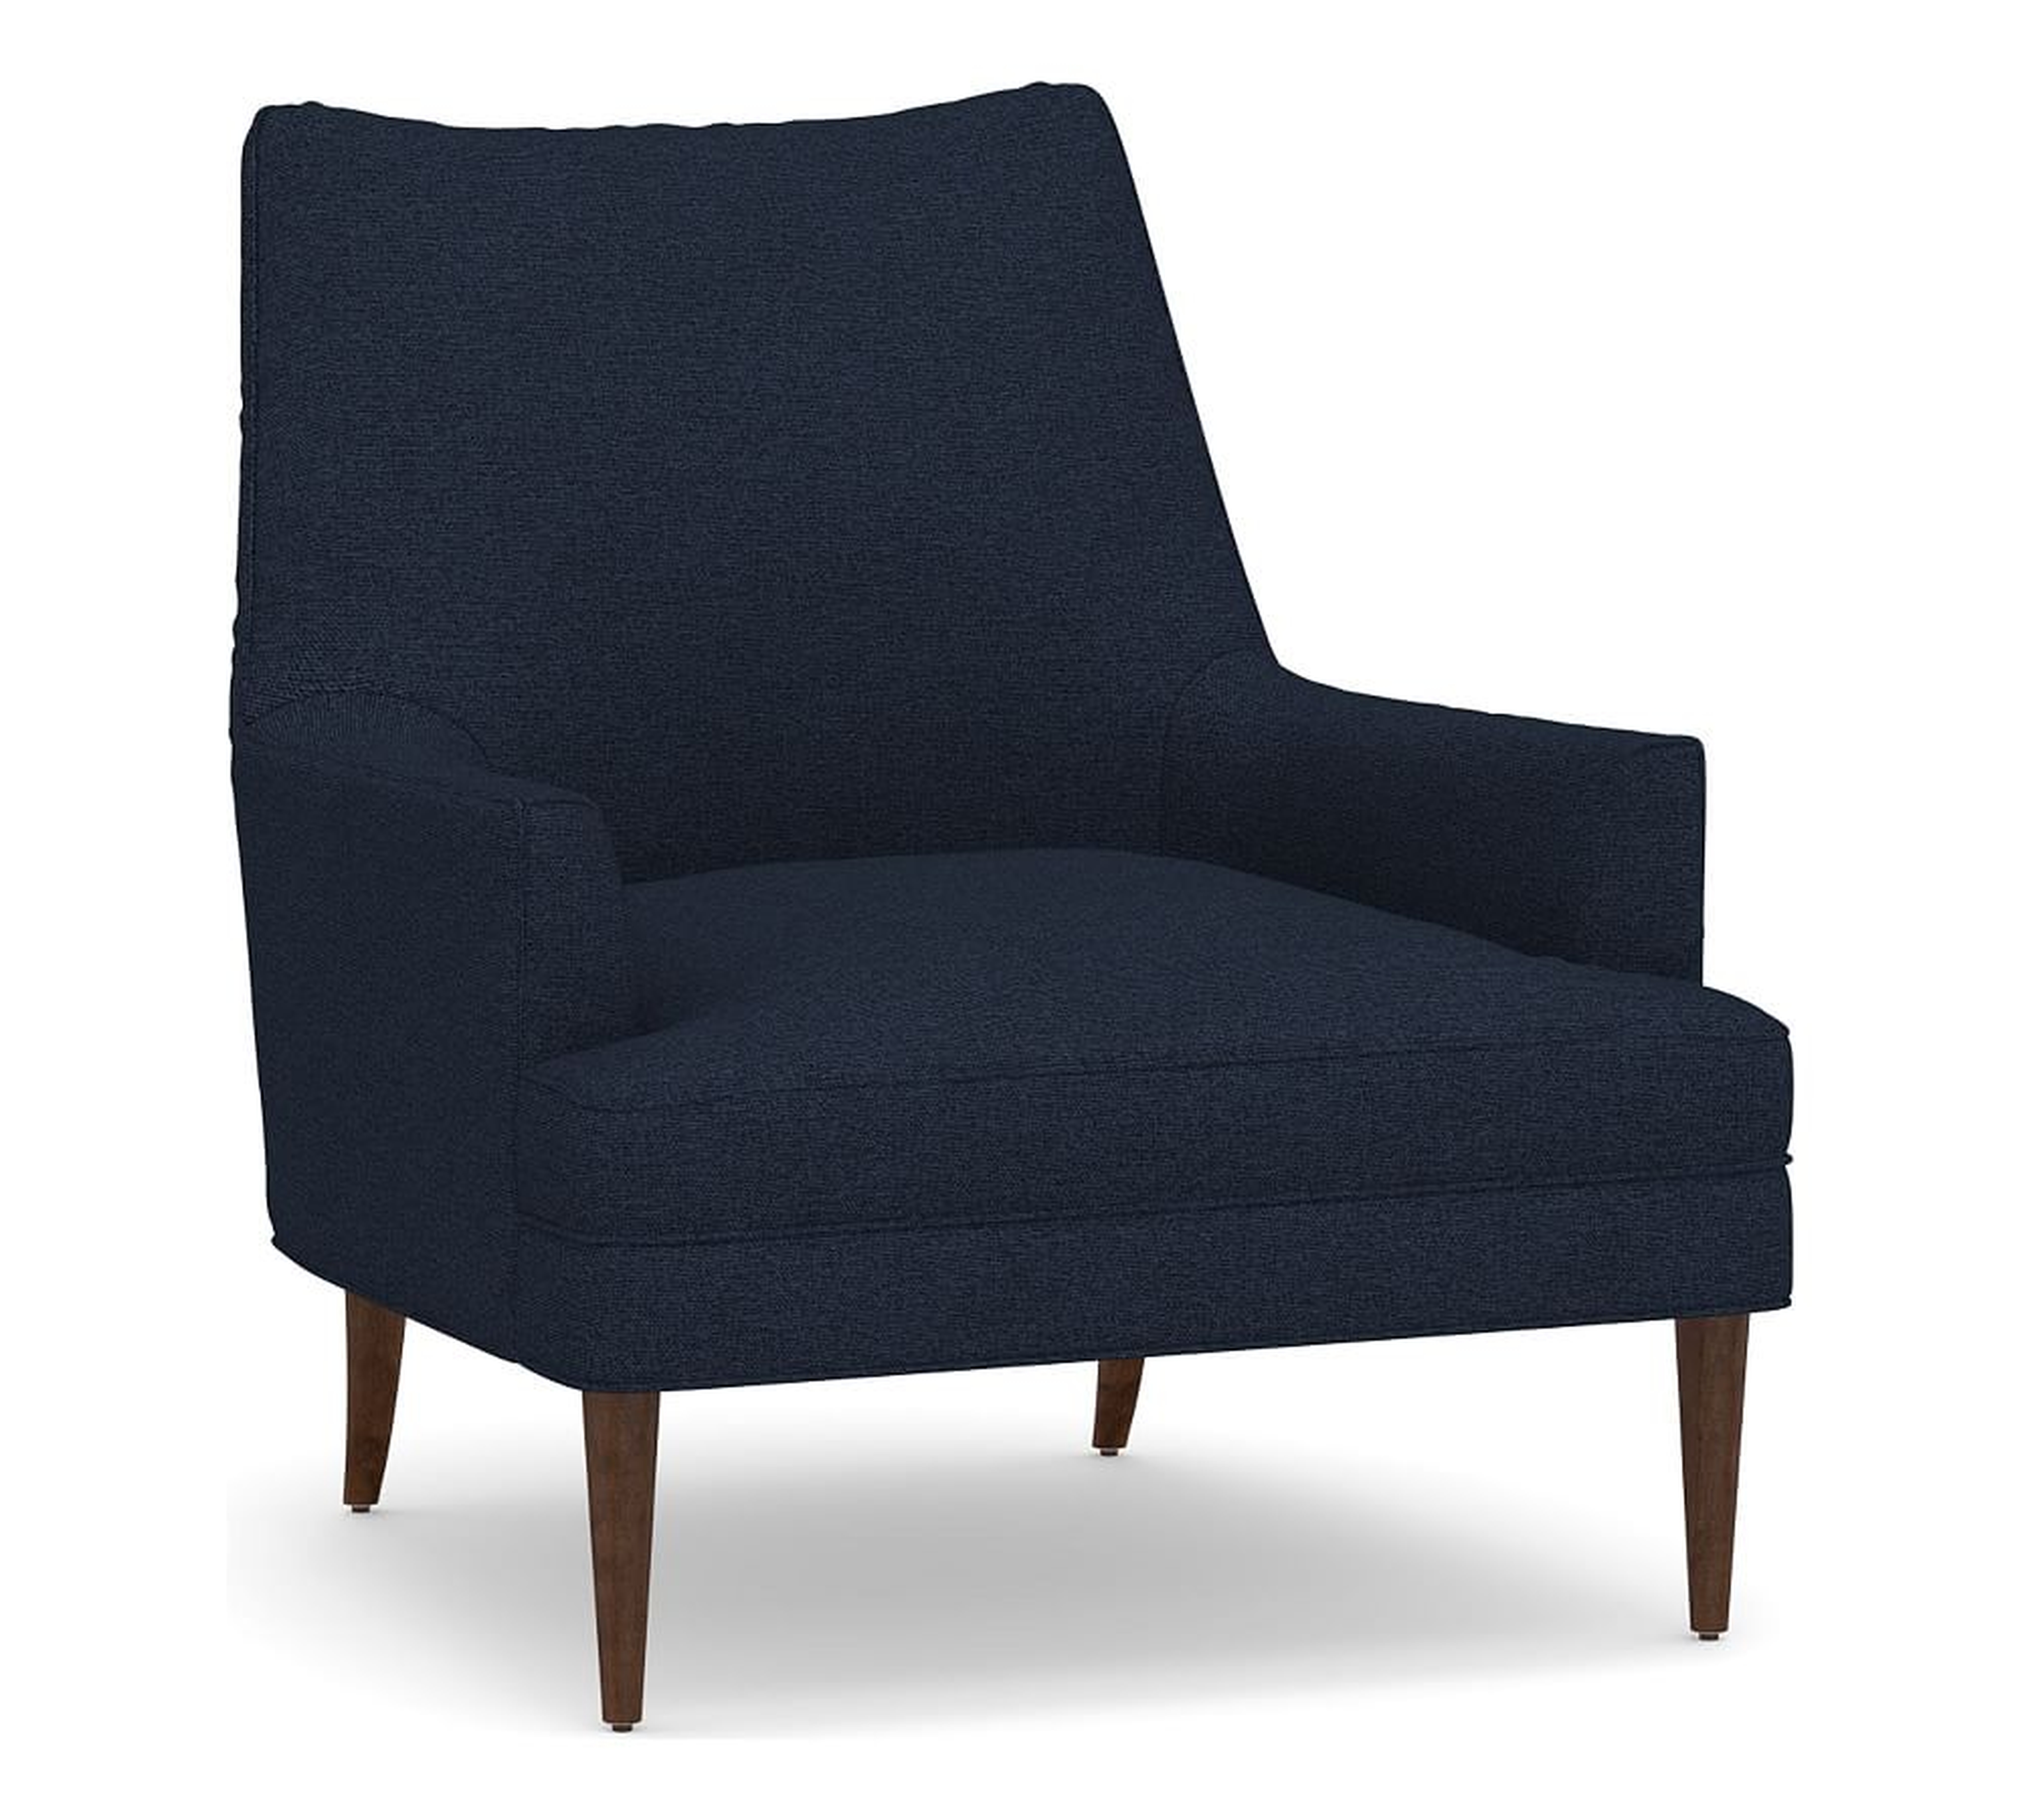 Reyes Upholstered Armchair, Polyester Wrapped Cushions, Performance Heathered Basketweave Navy - Pottery Barn